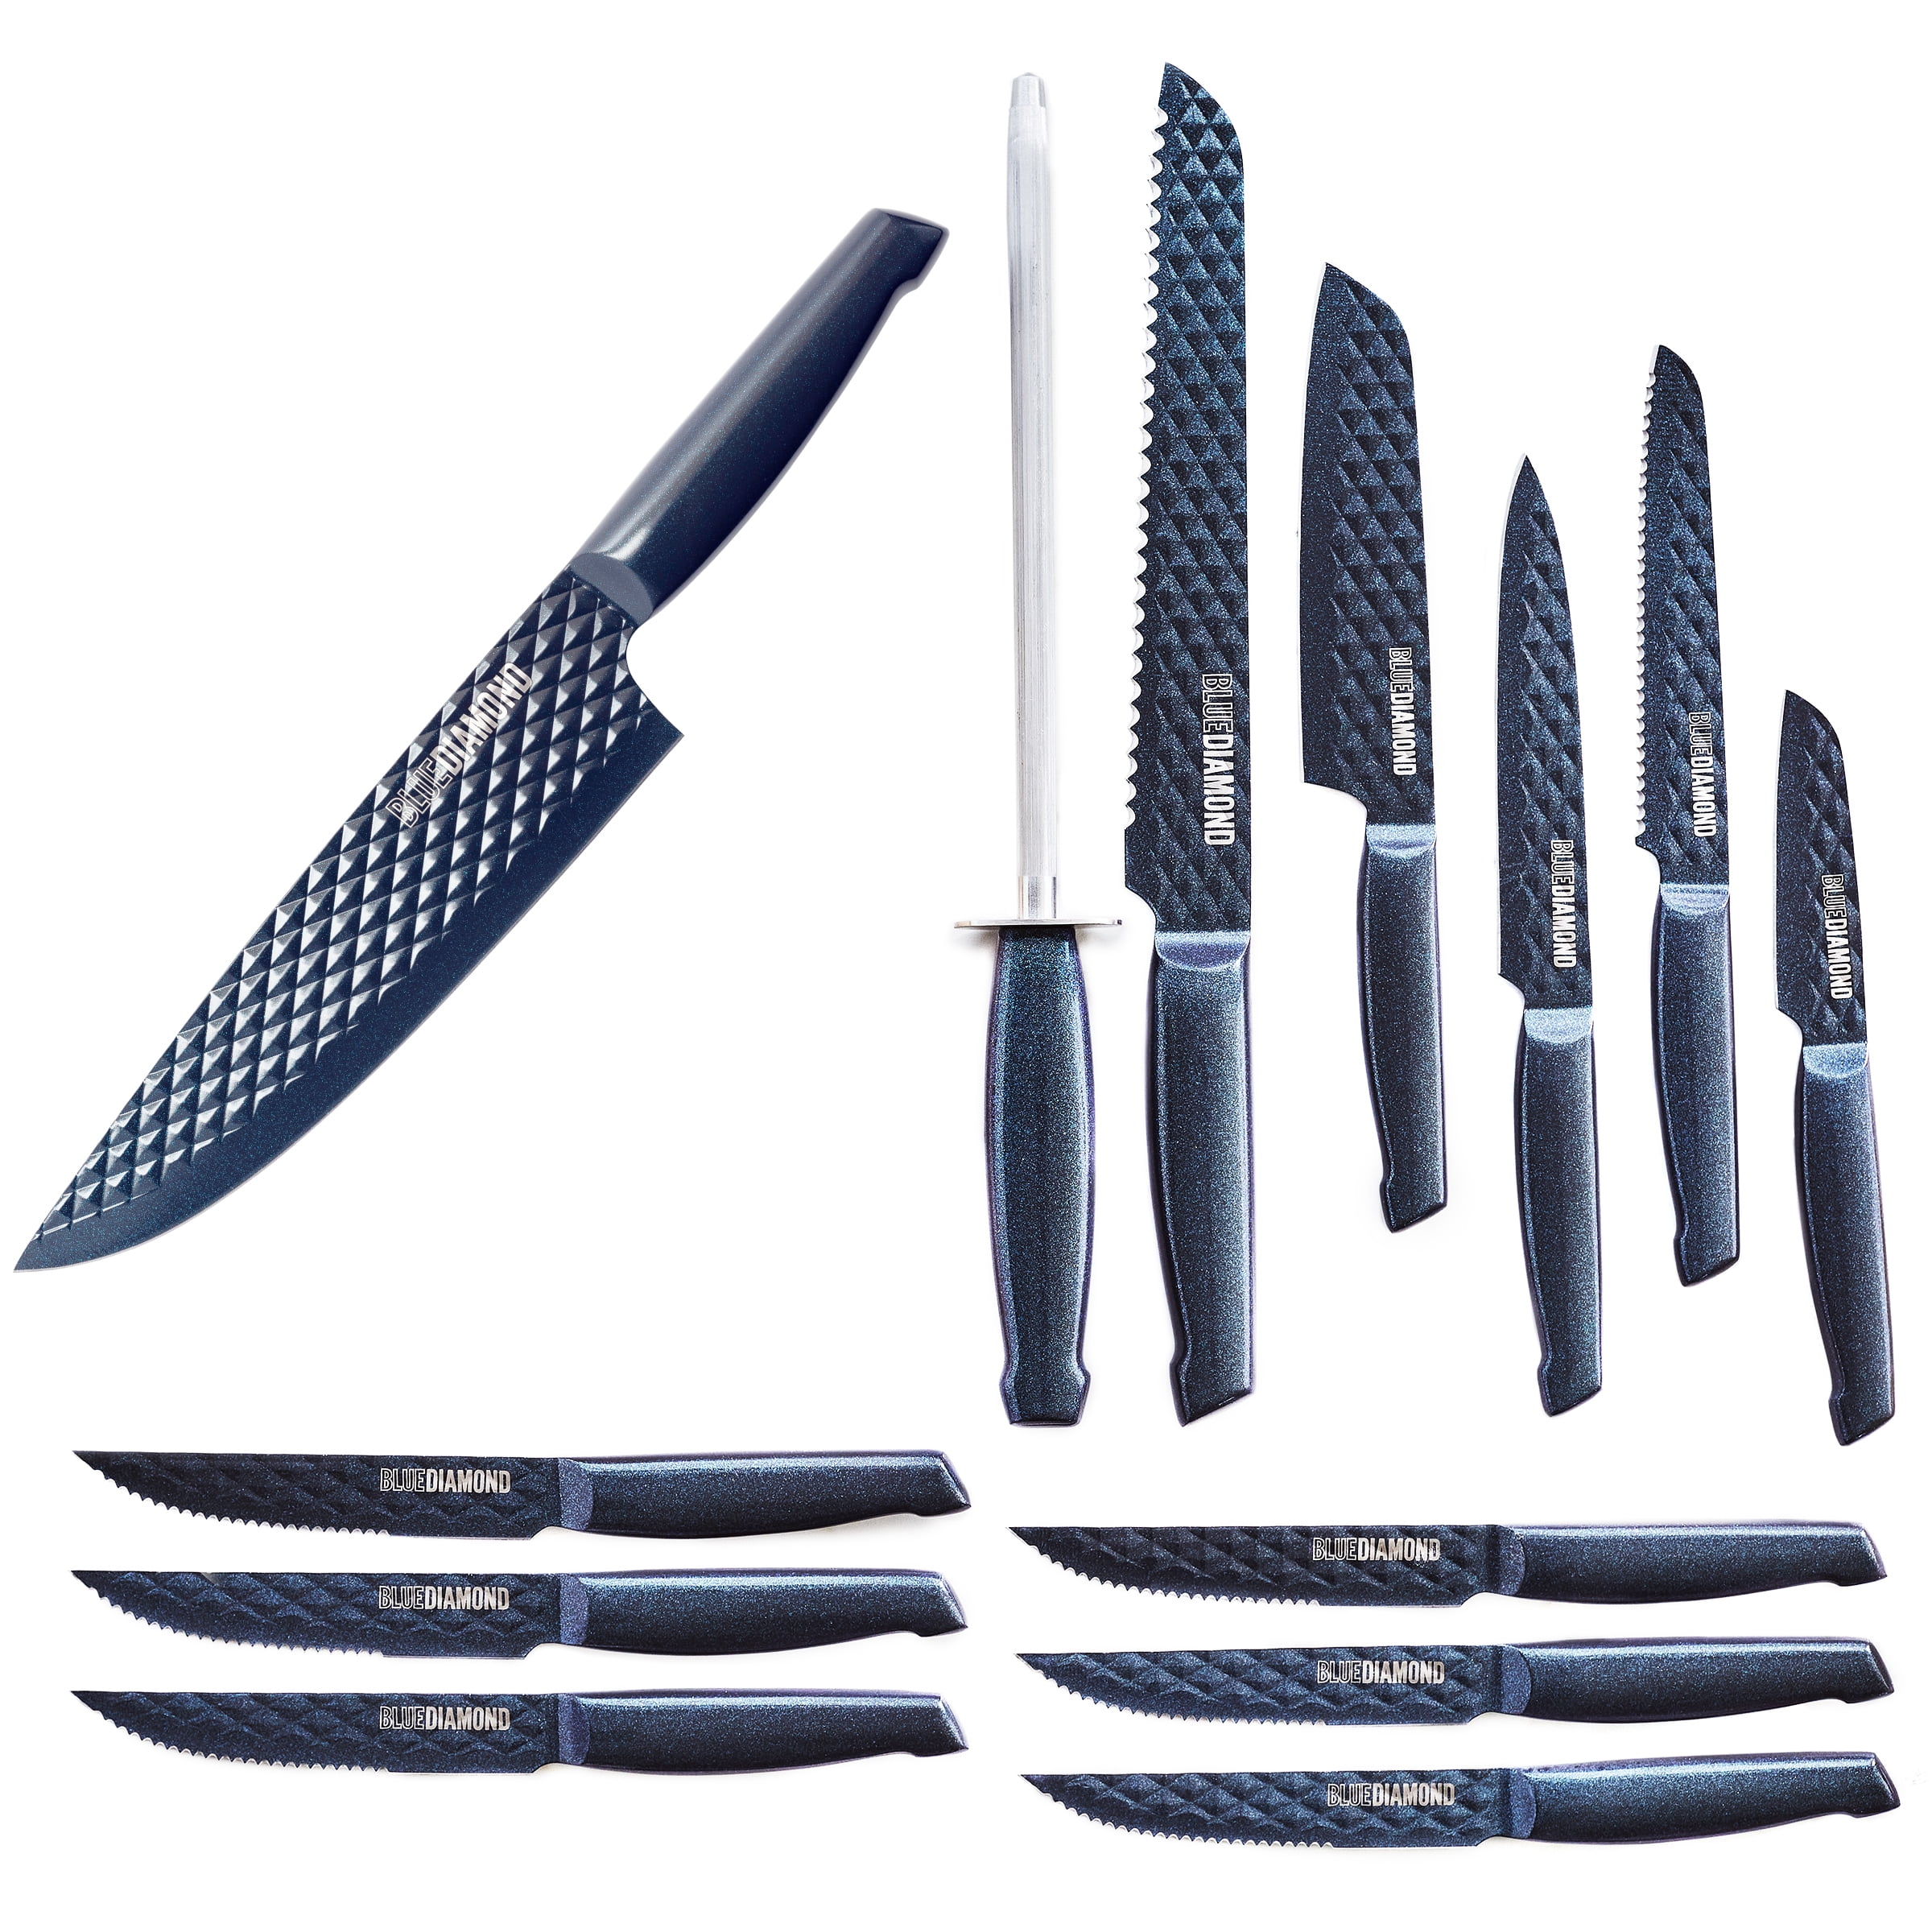 Blue Diamond Sharp Stone Nonstick Stainless Steel Cutlery, 4 Piece Set  including Chef Santoku Serrated and Pairing Knives with Covers CC005568-001  - The Home Depot